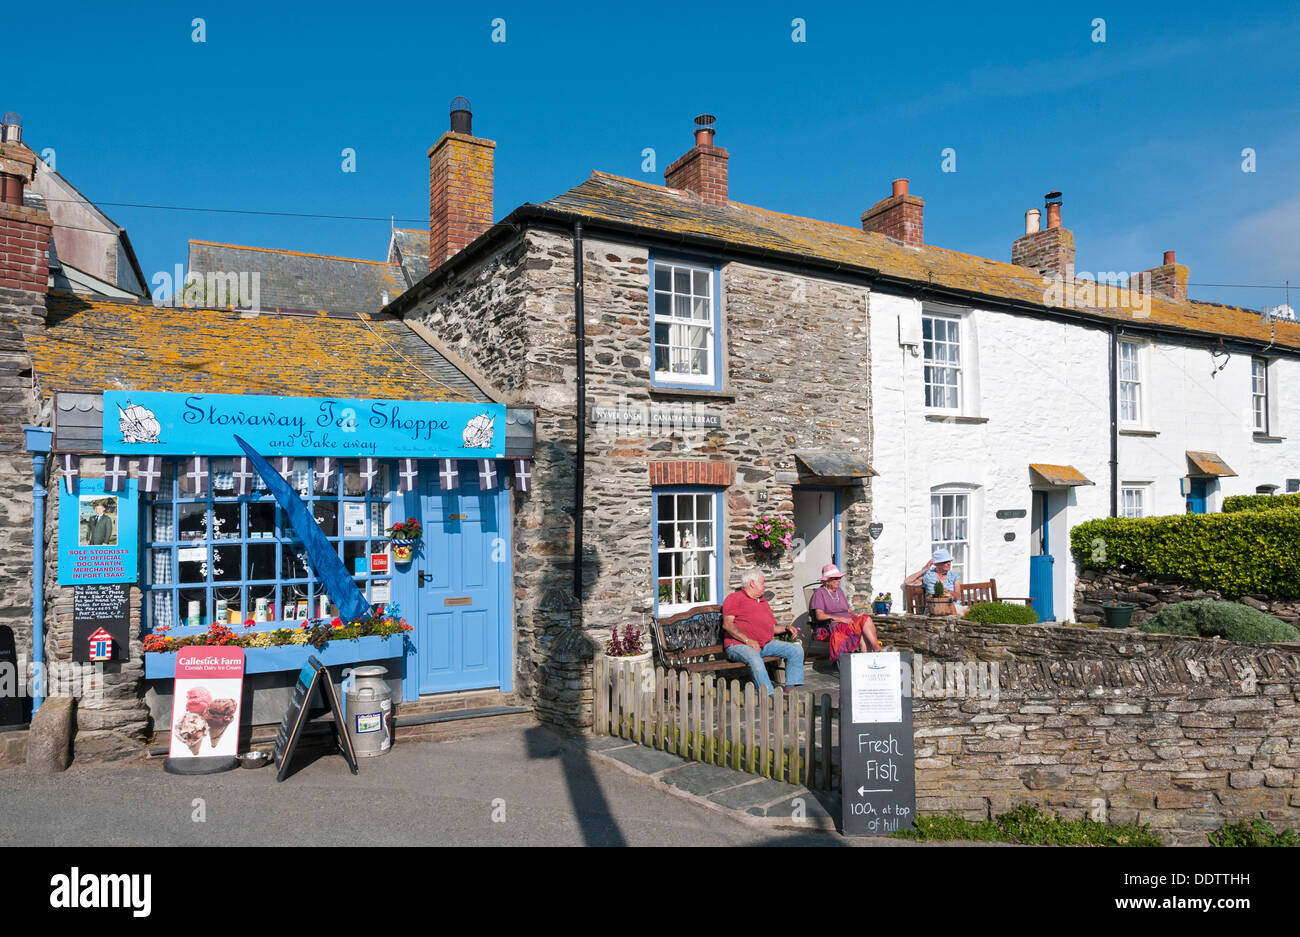 Great Britain, England, North Cornwall, Port Isaac, tea shoppe, take away, 'Doc Martin' merchandise stockist, private residences Stock Photo